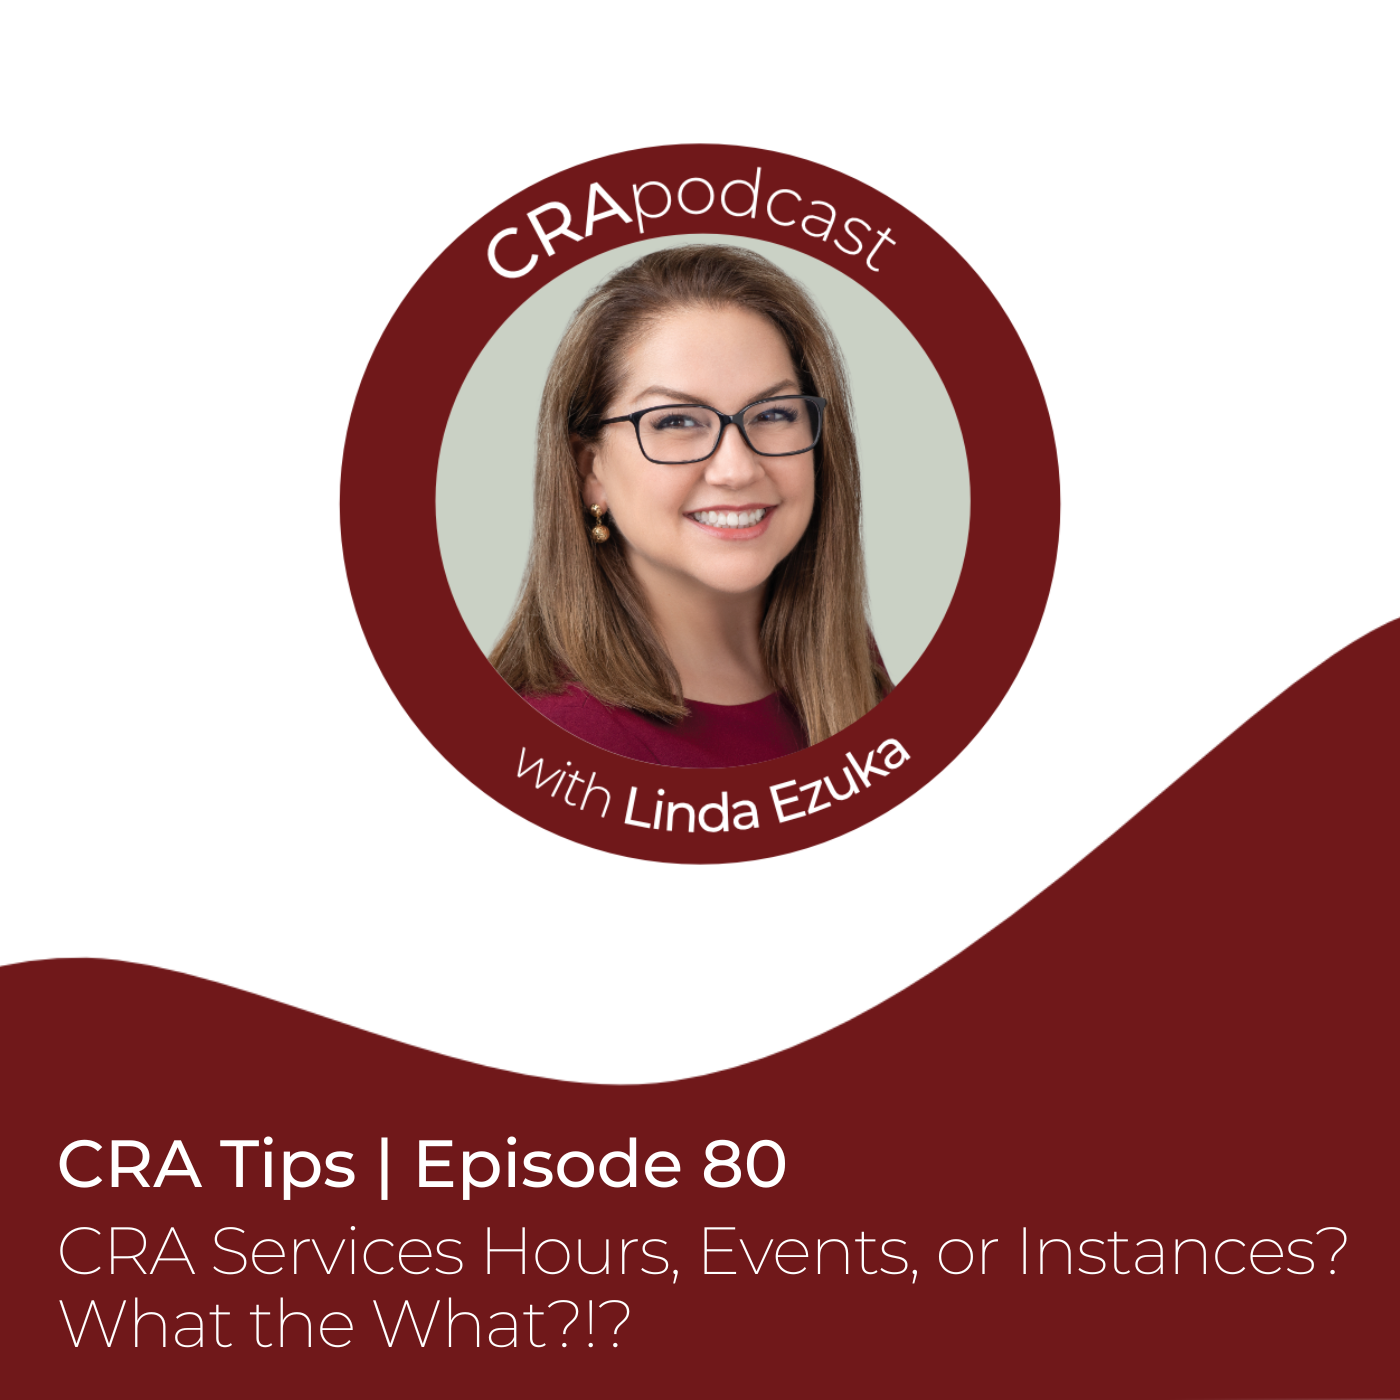 Episode 80: CRA Tips: CRA Services Hours, Events, or Instances? What the What?!?